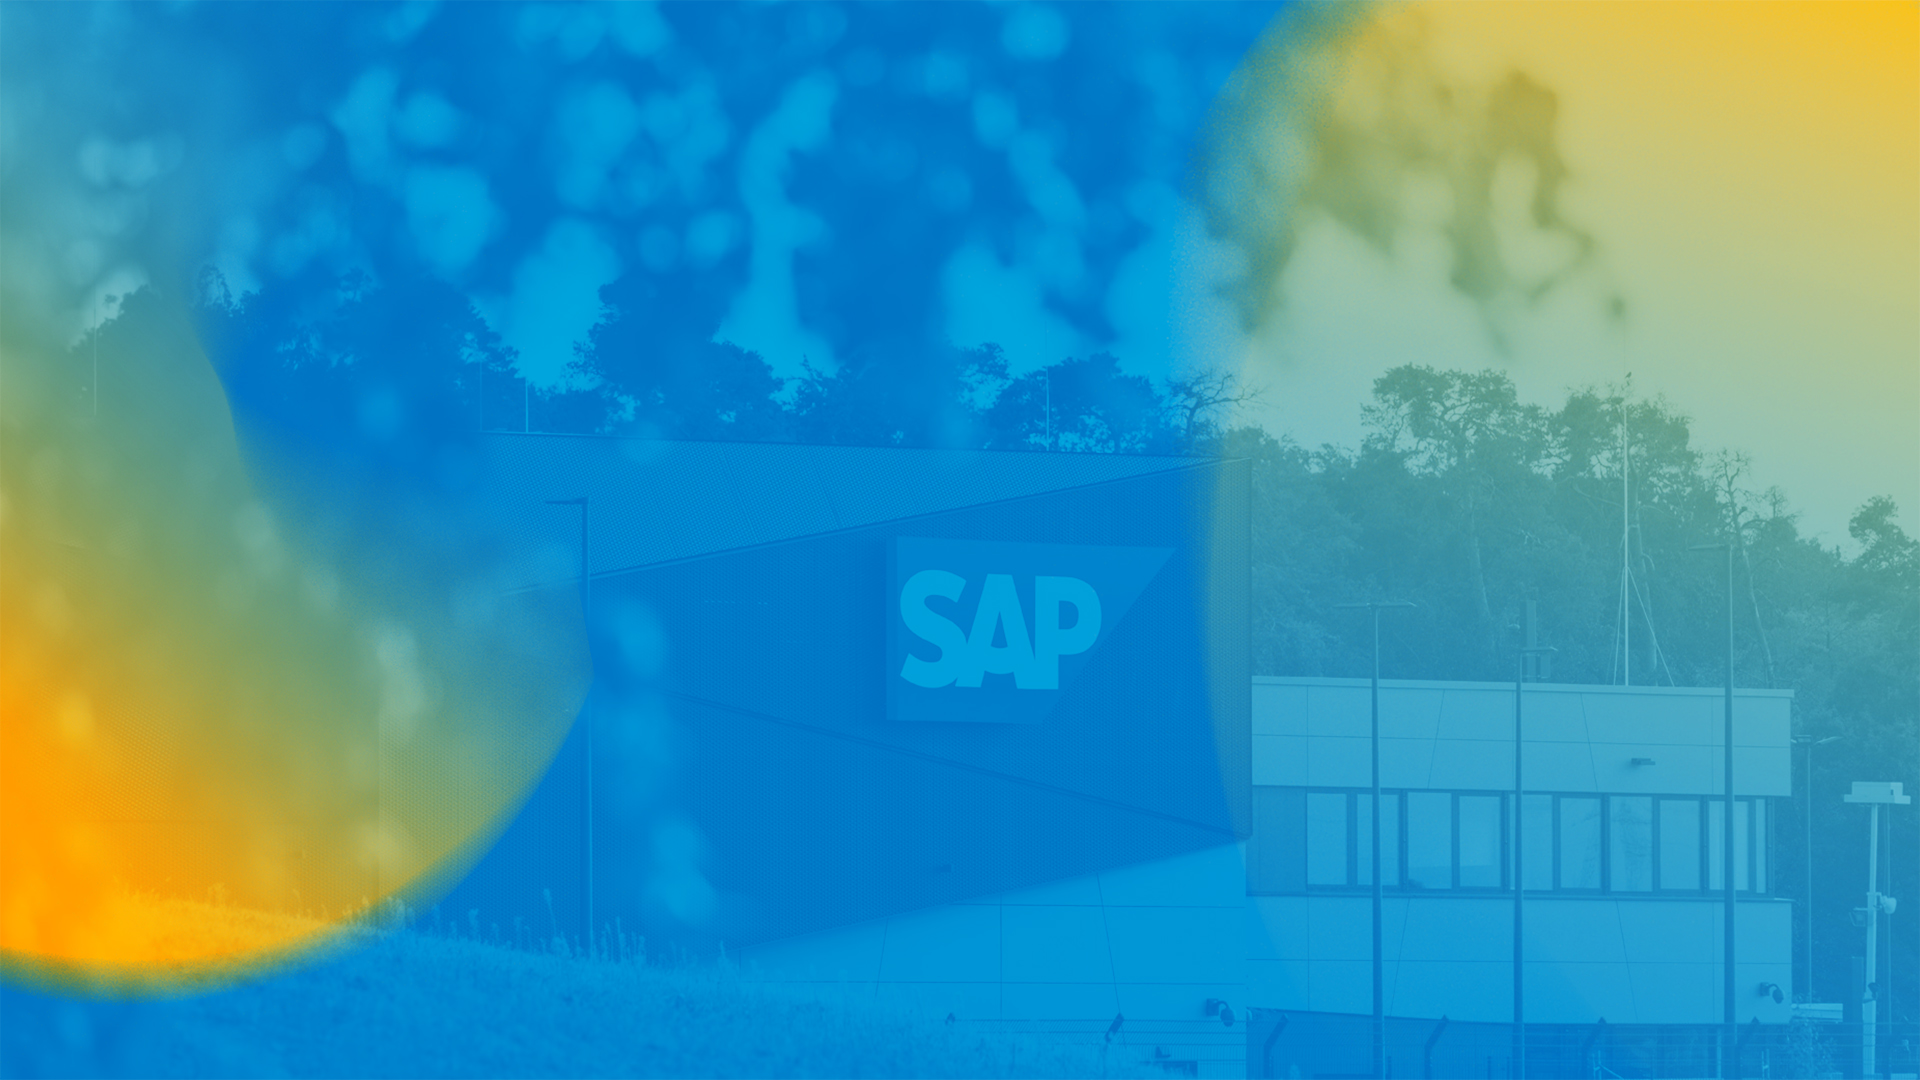 SAP Leverages Its Massive Network to Uplift Diverse Startup Founders